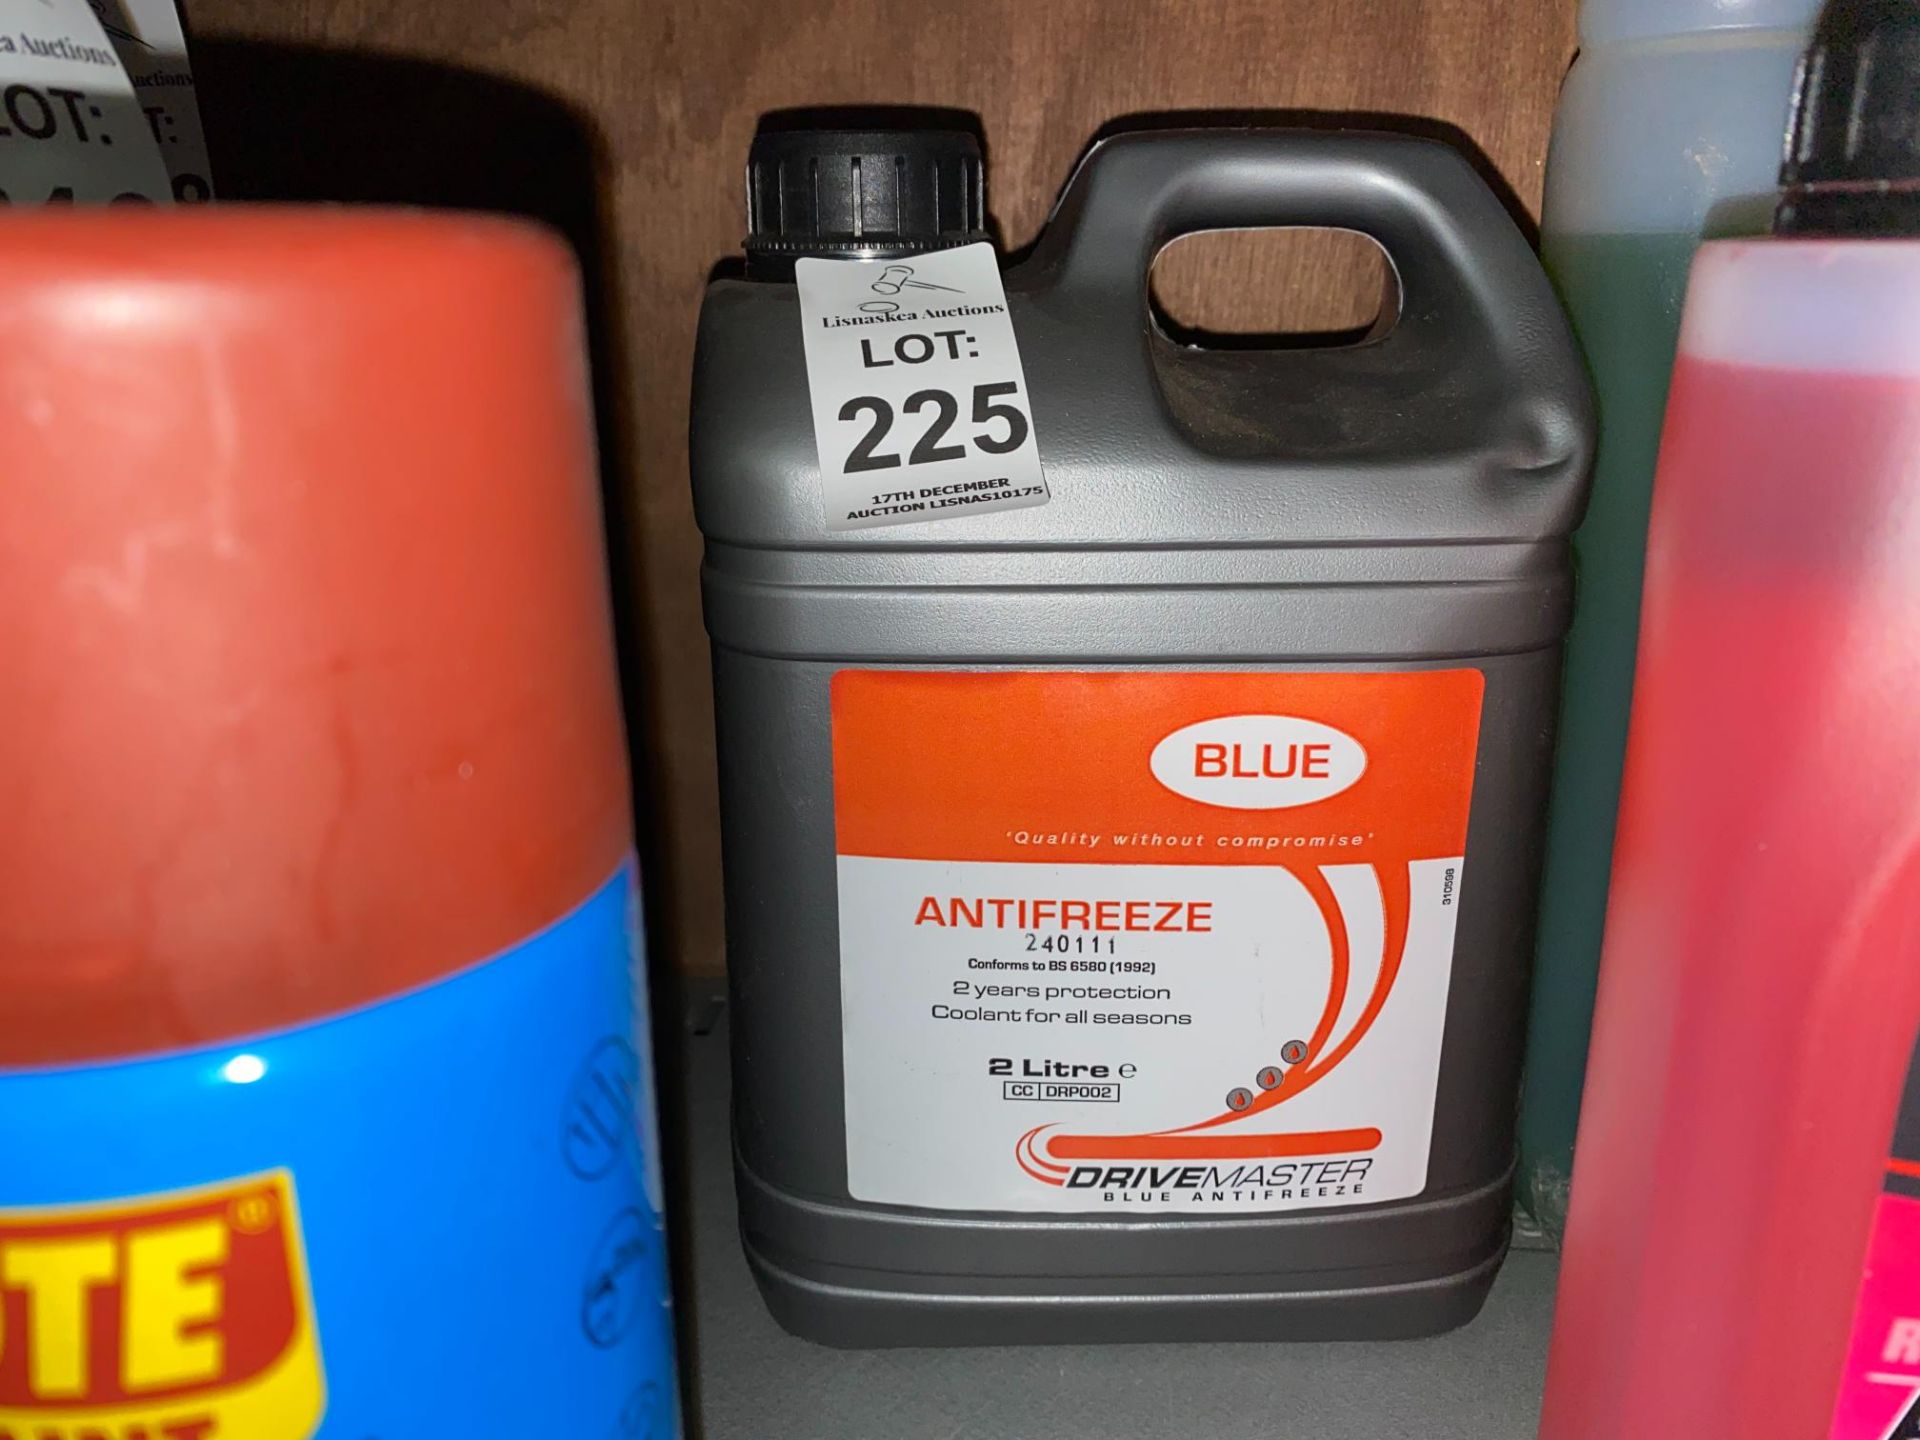 2LITRE CAN OF ANTIFREEZE